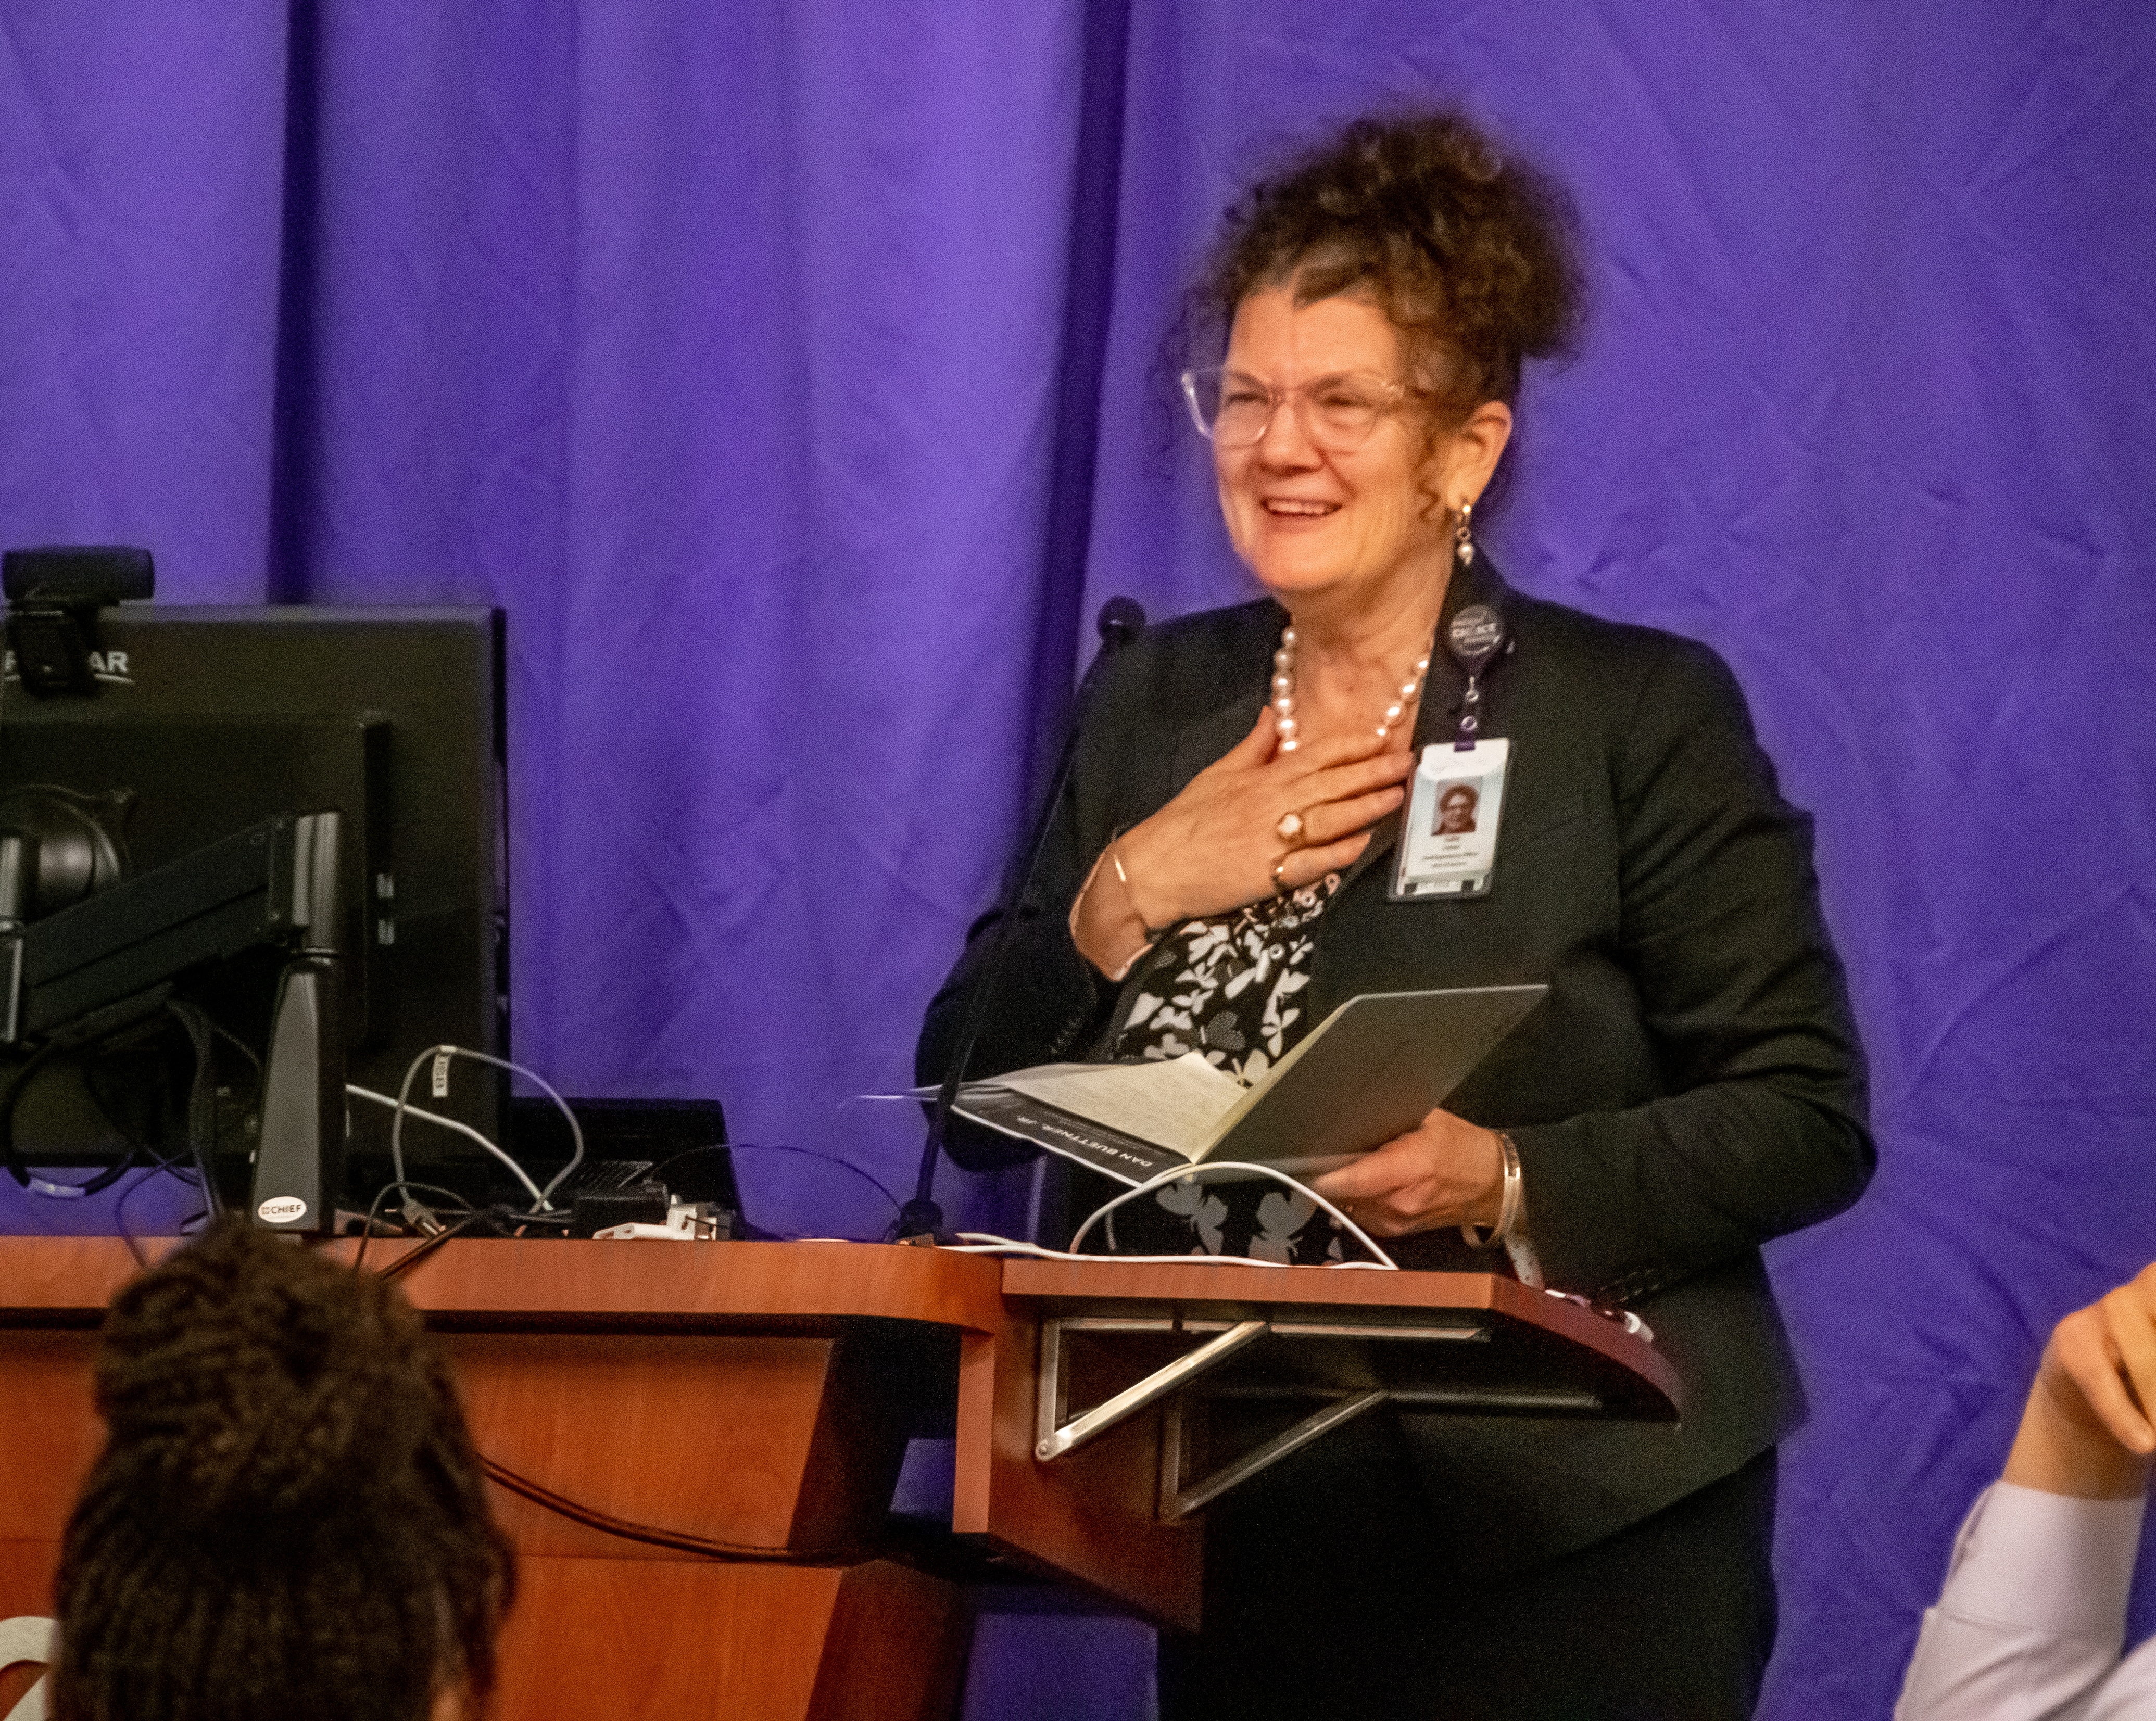 Dr. Julie Kennedy Oehlert, chief experience officer at ECU Health, speaks at a Blue Zone event at ECU Health Medical Center.